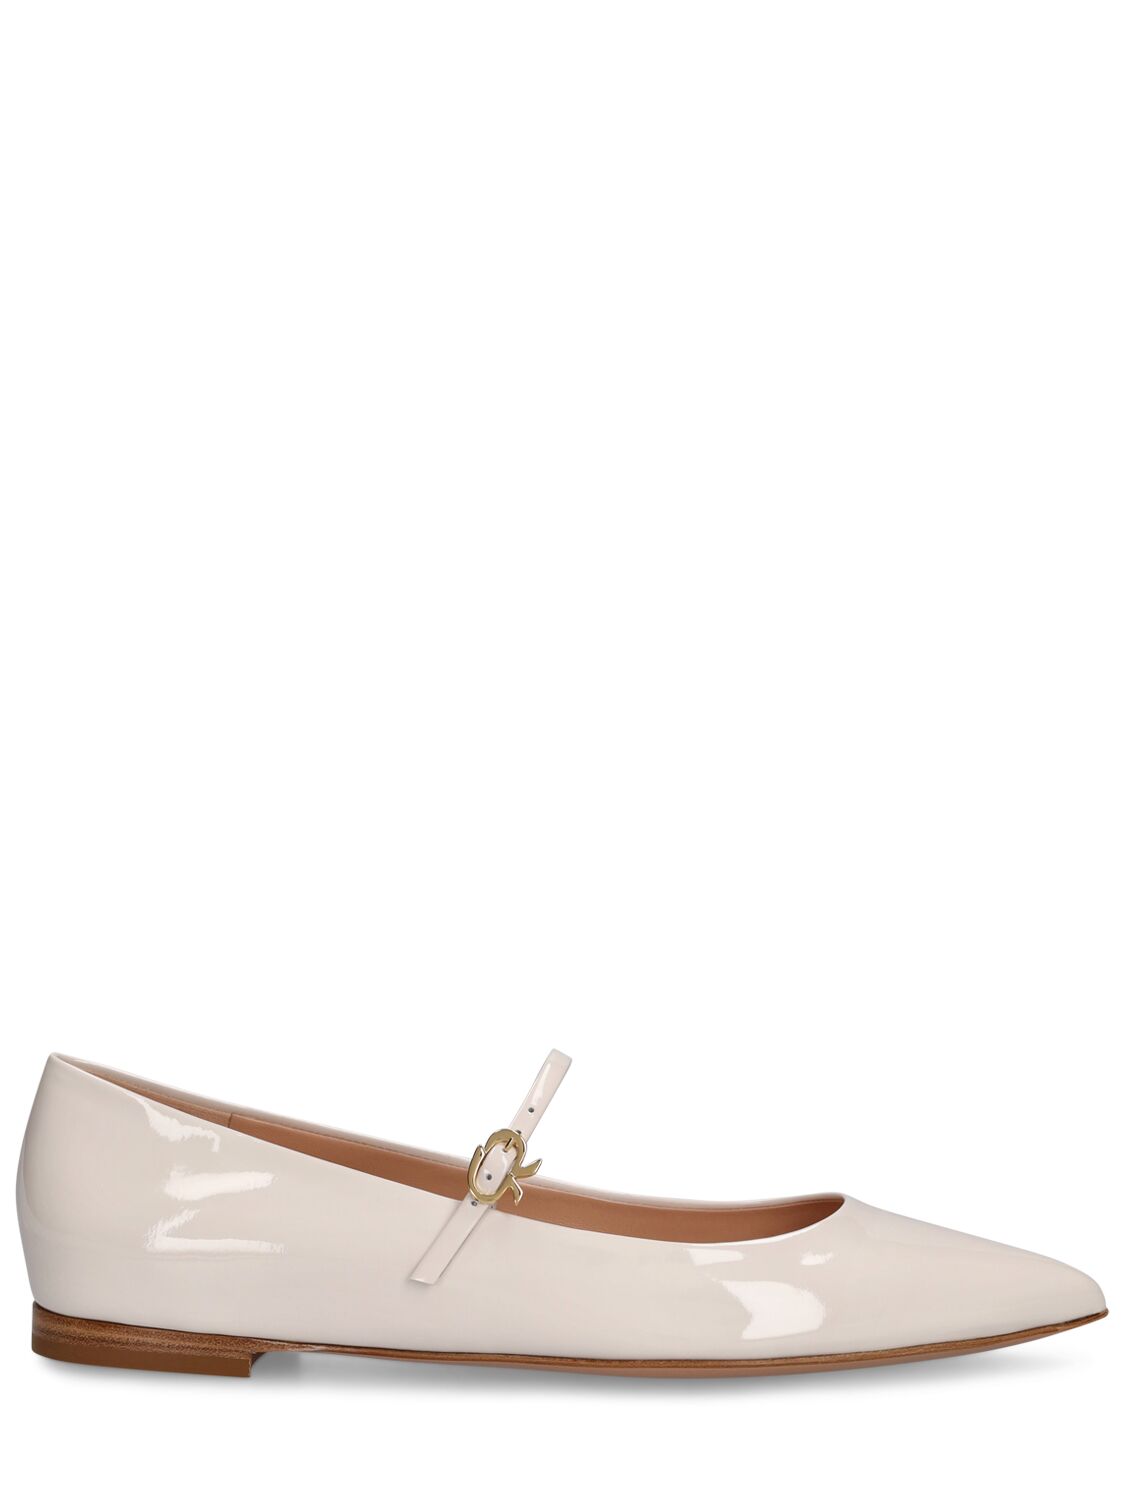 Gianvito Rossi 5mm Ribbon Patent Leather Maryjane Flats In Off White